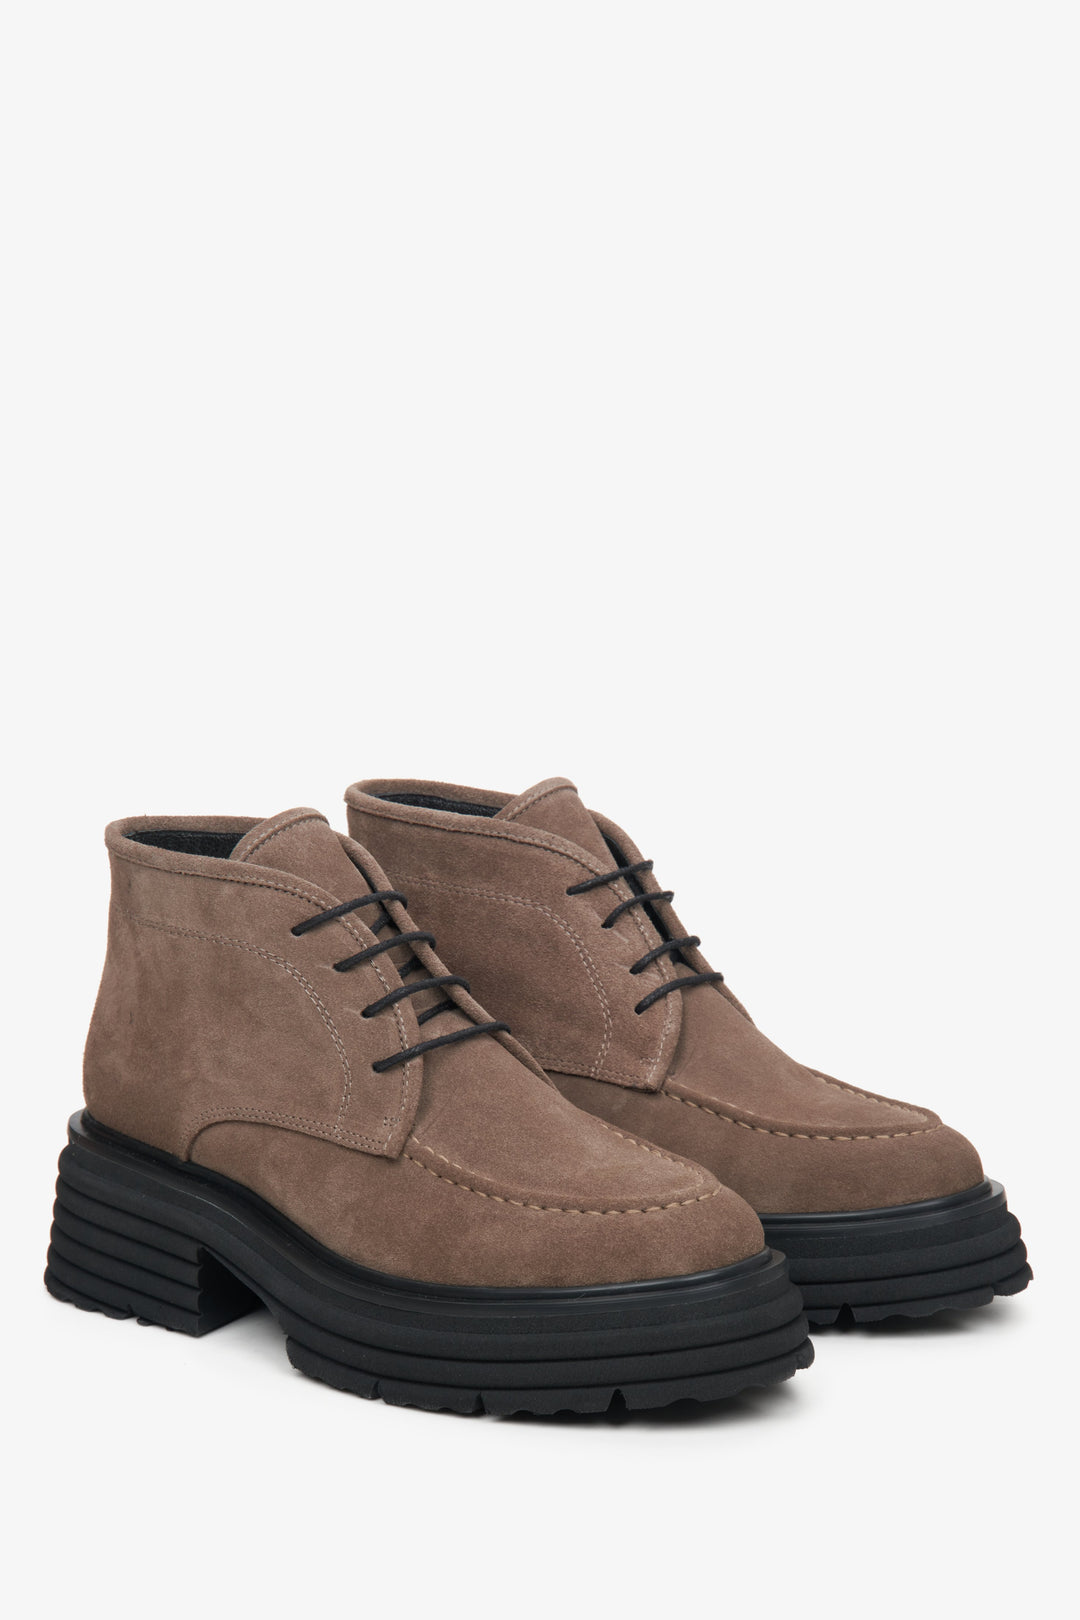 Women's suede brown lace-up boots.